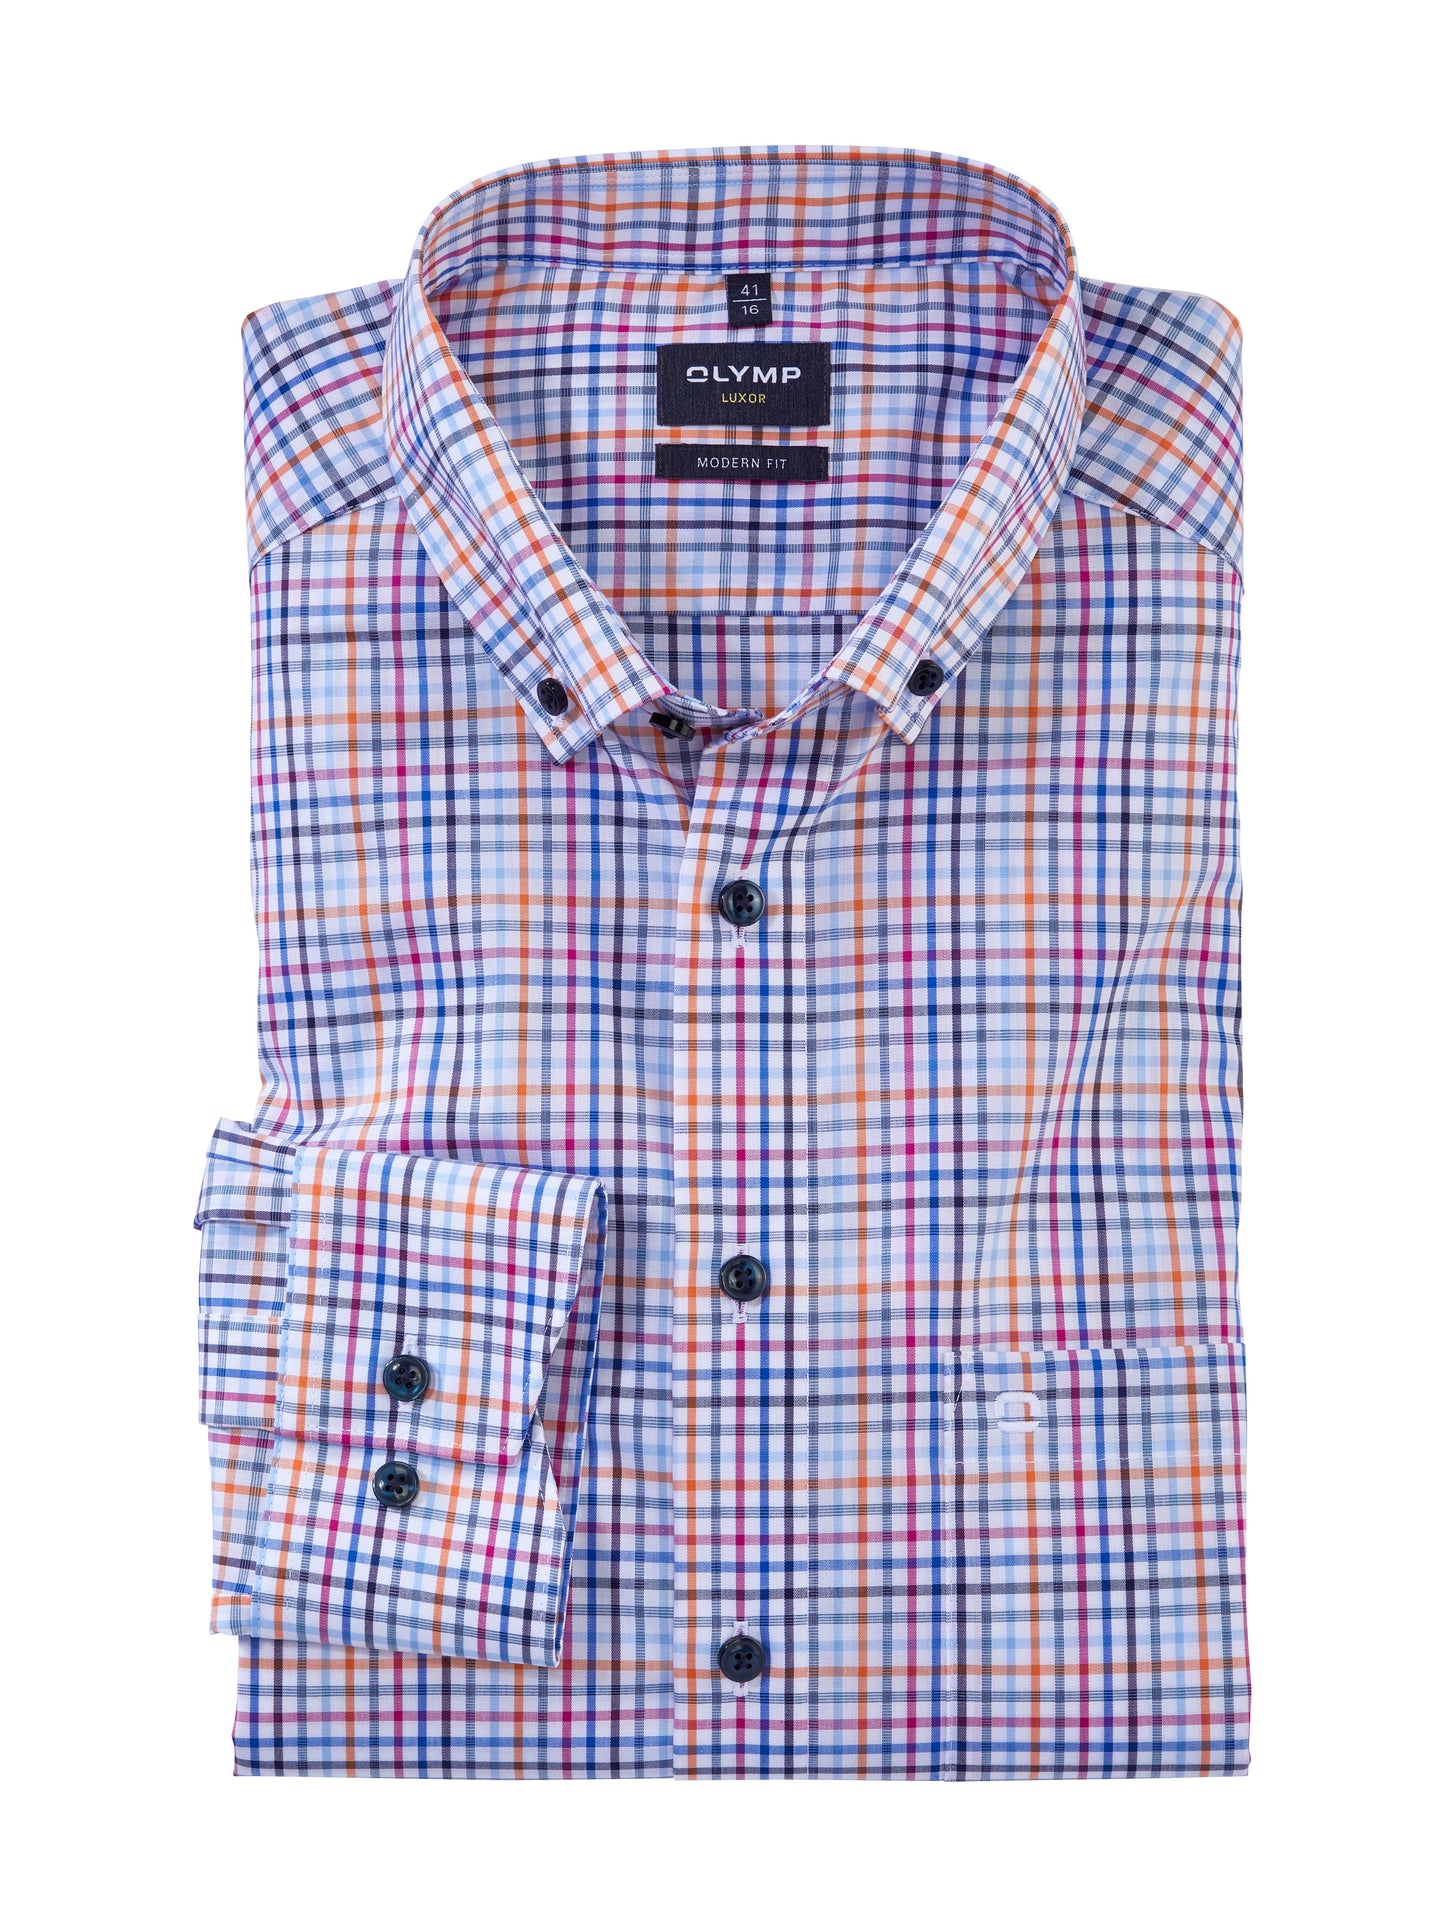 Olymp Luxor Mod Fit LS Shirt Check